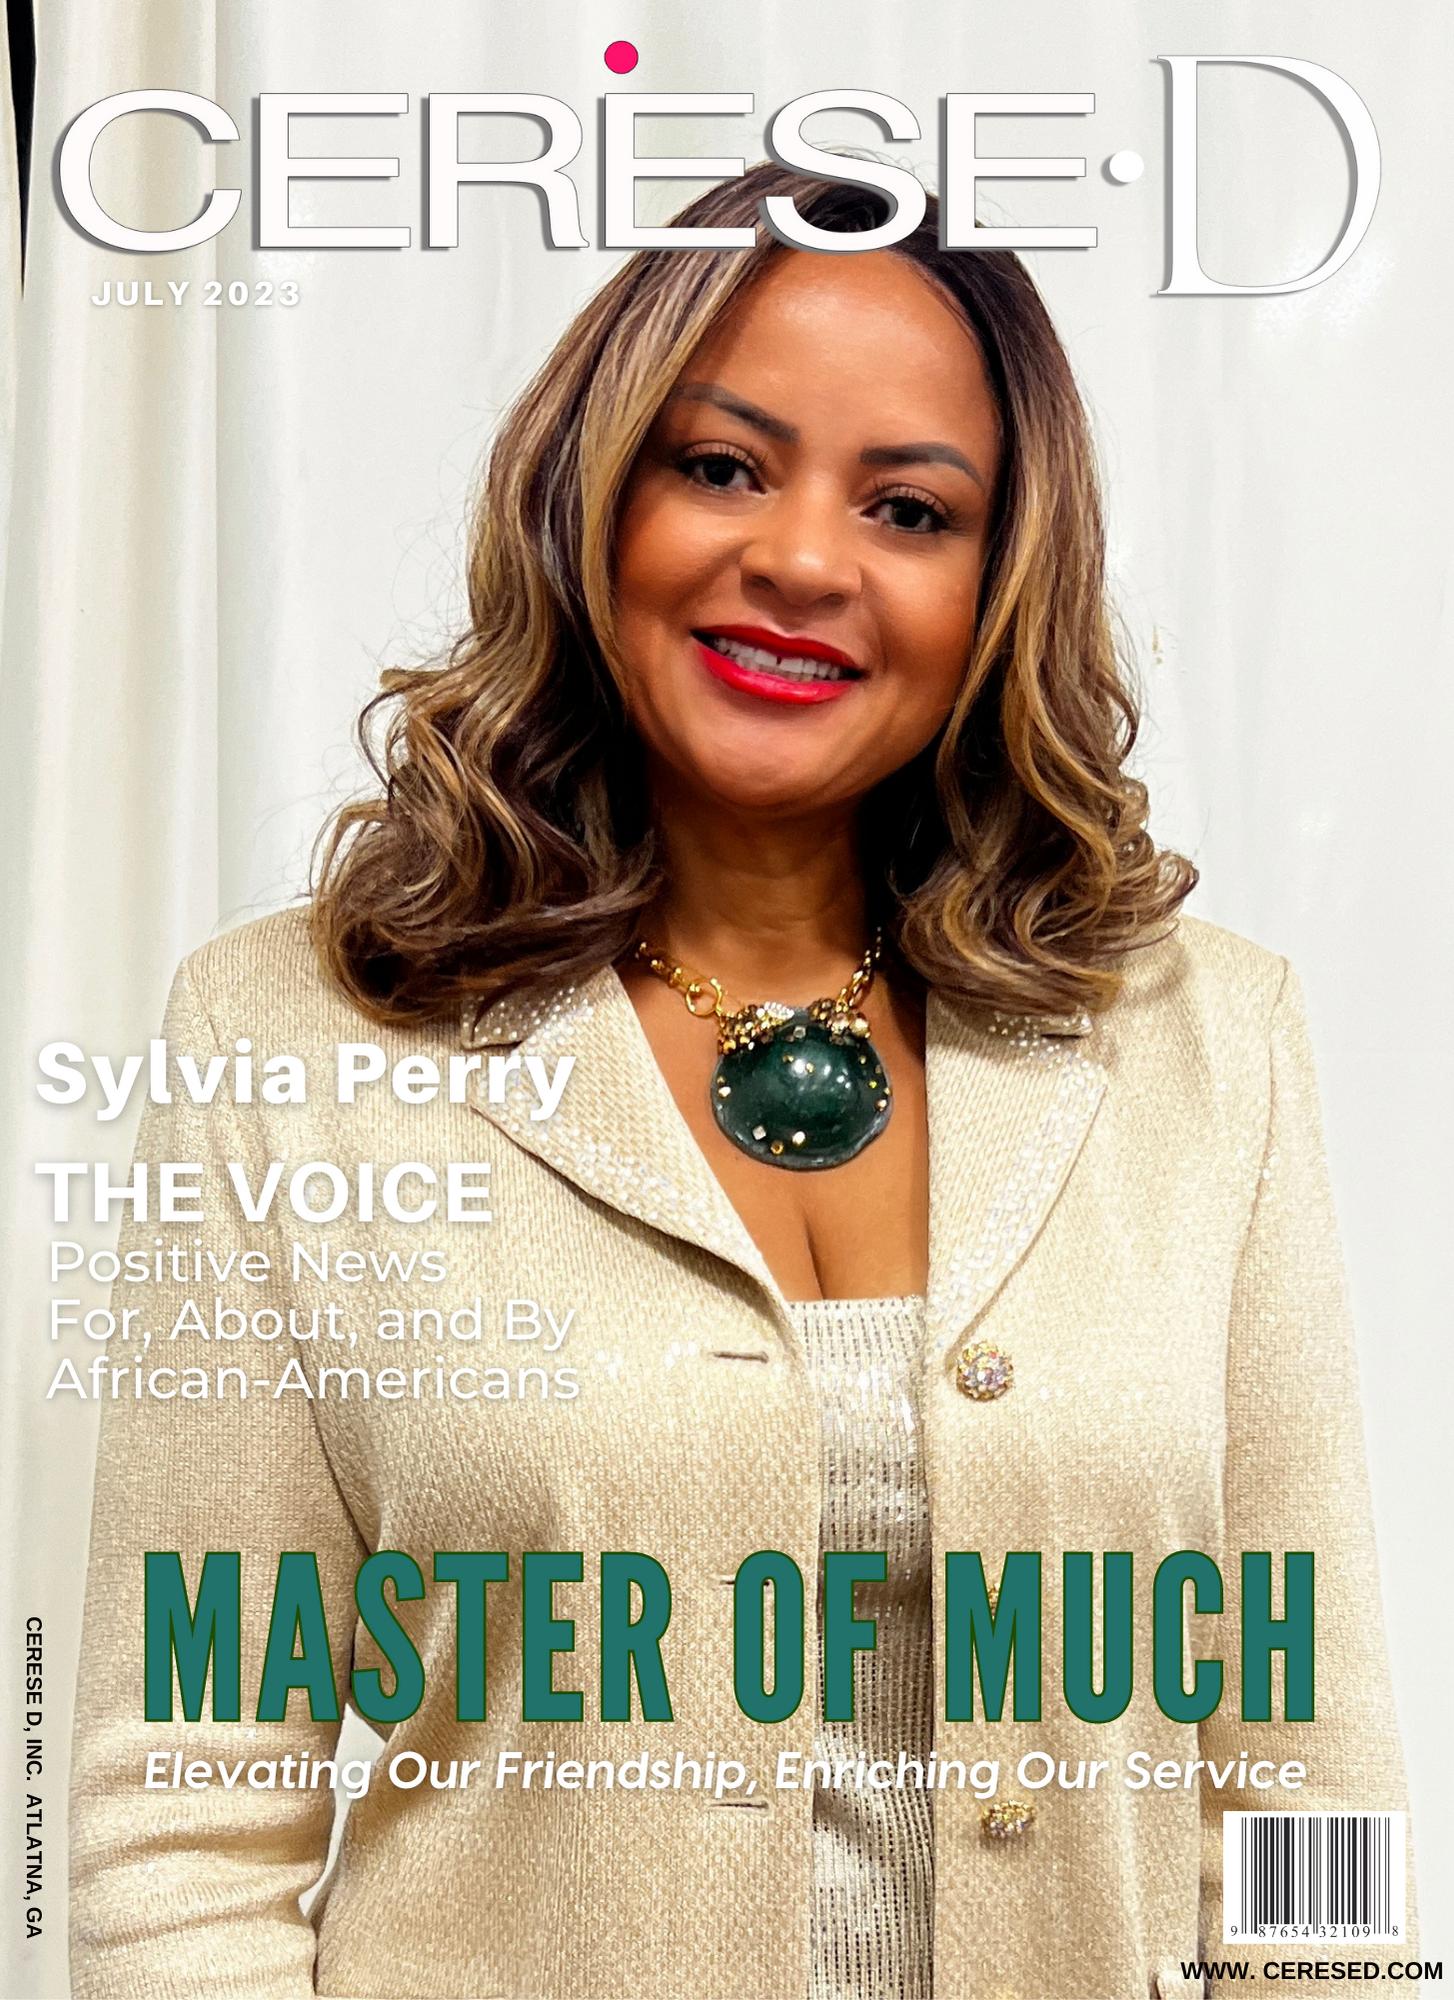 Image of beautiful black woman smiling in front of a white draped background wearing a cream colored suit jacket and a large green stone pendant with gold chain on a Cerese D magazine cover